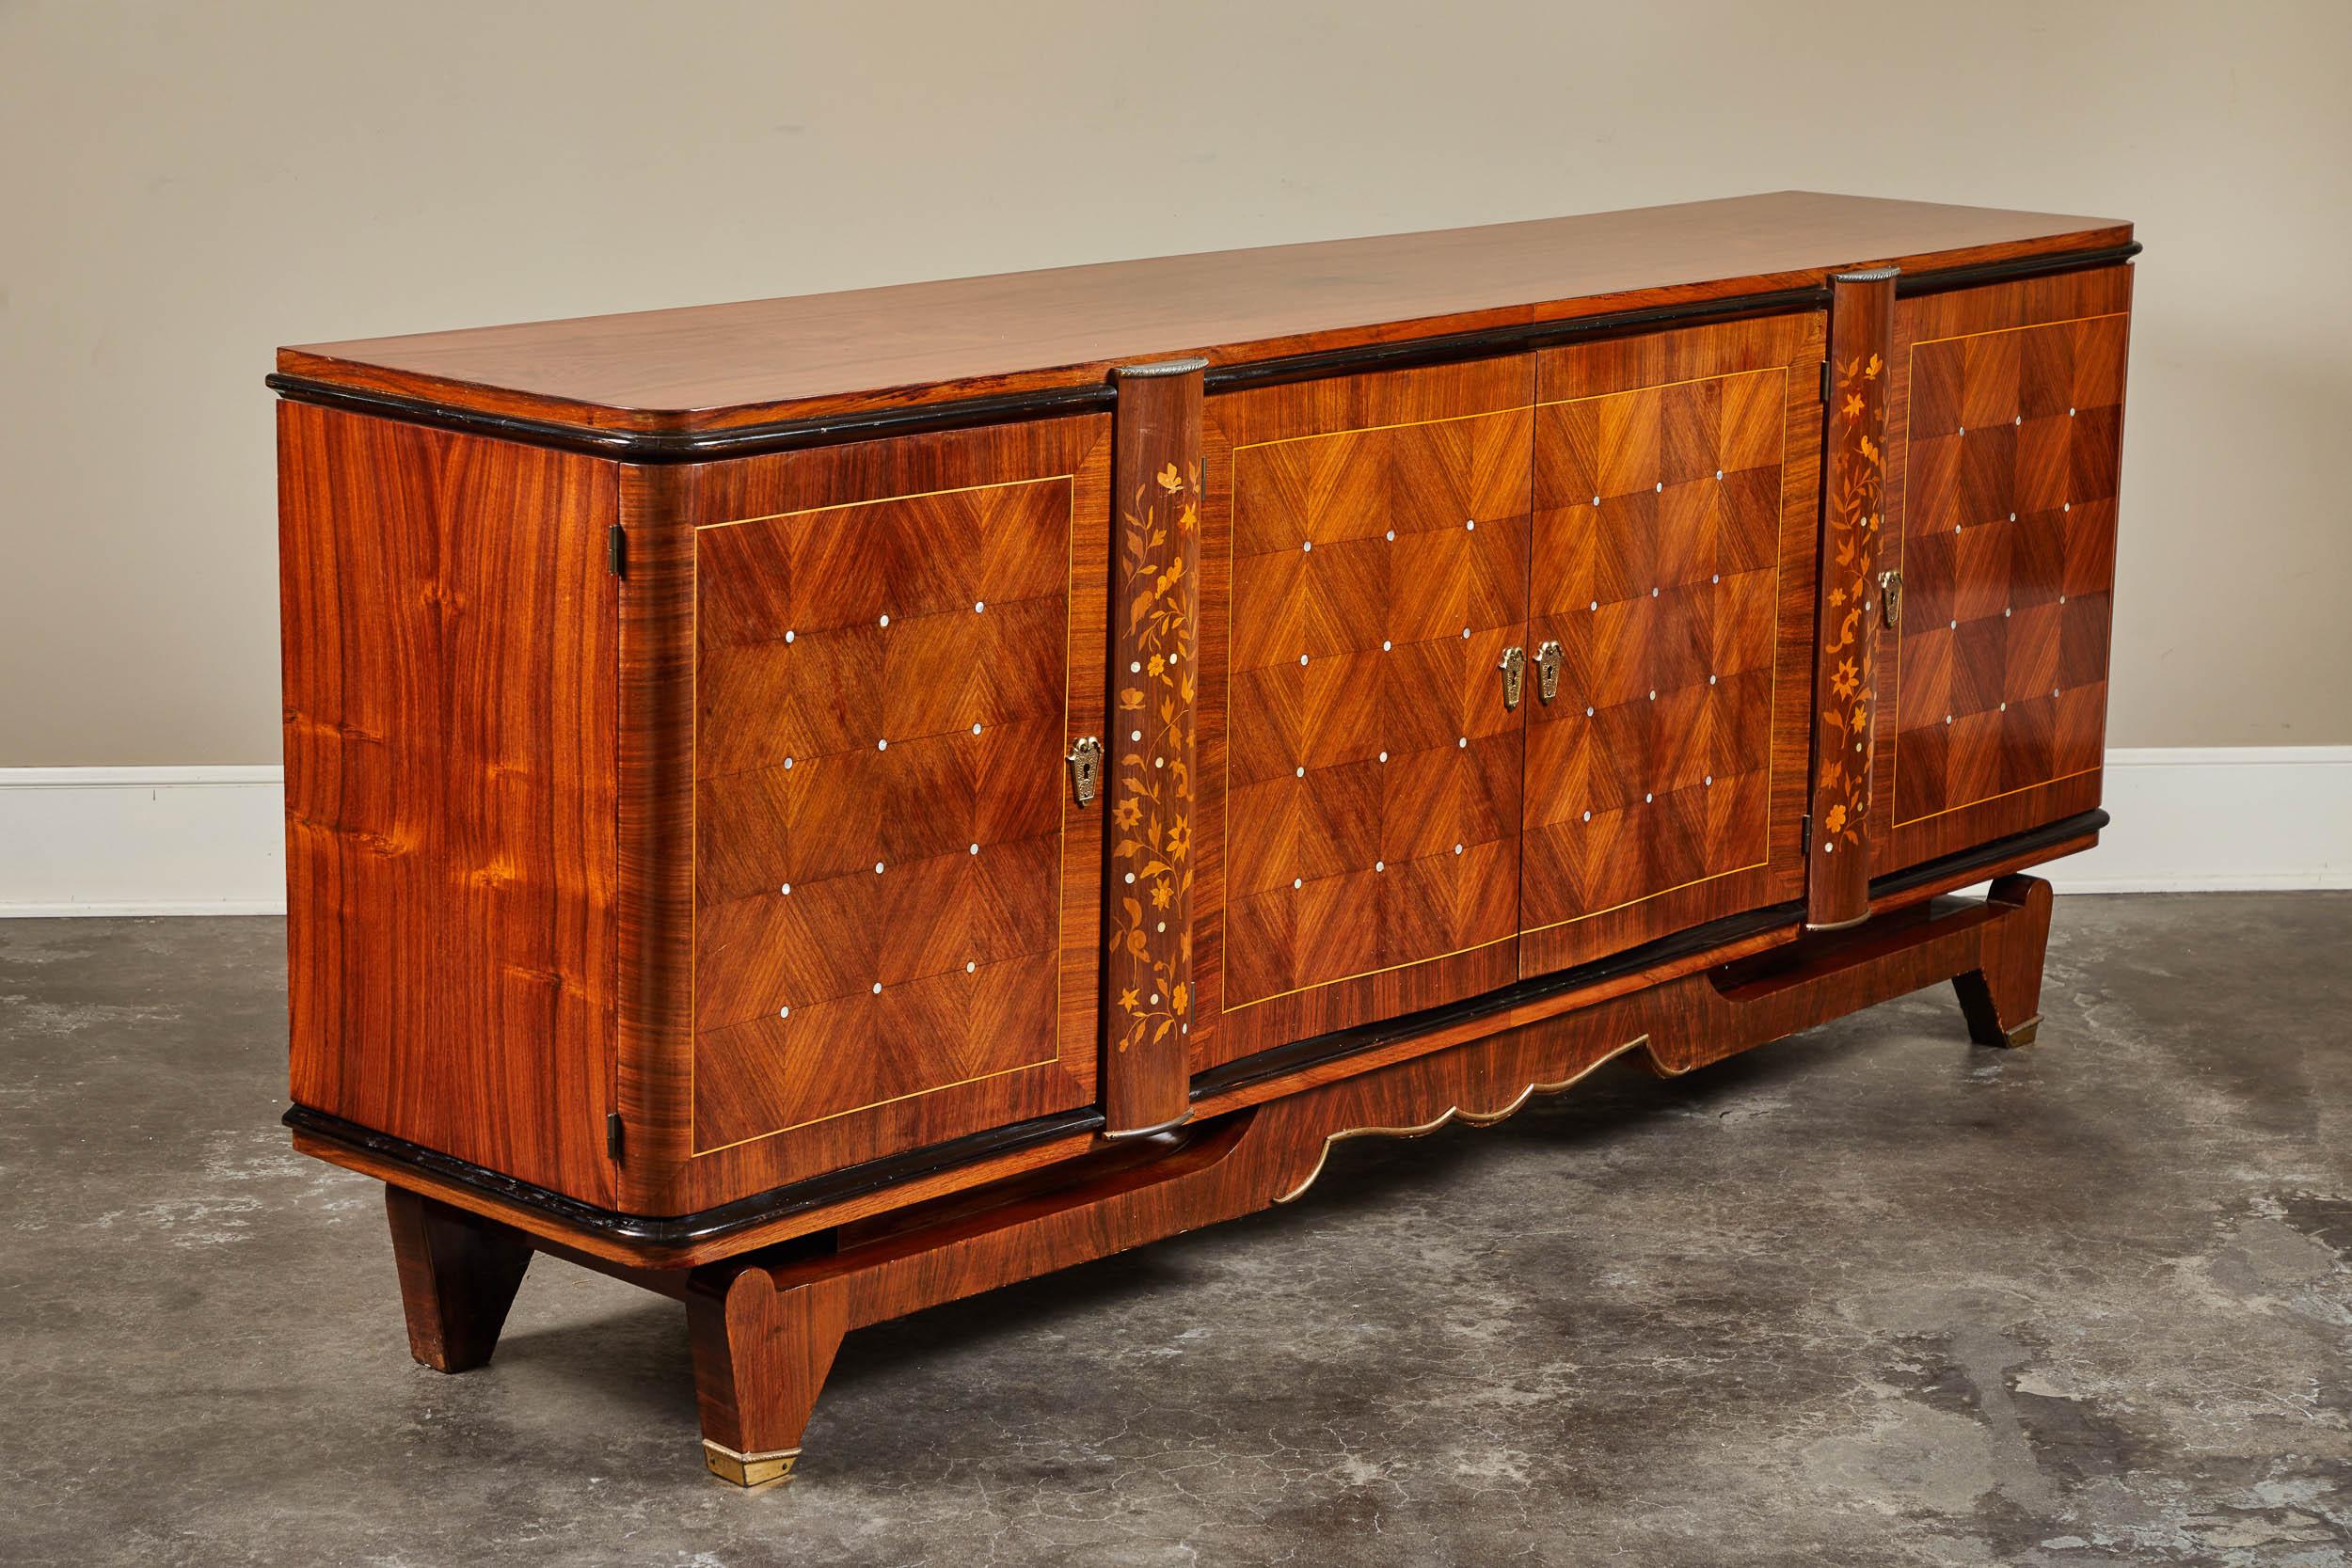 Inlay Early 20th Century Art Deco Rosewood Marquetry Sideboard